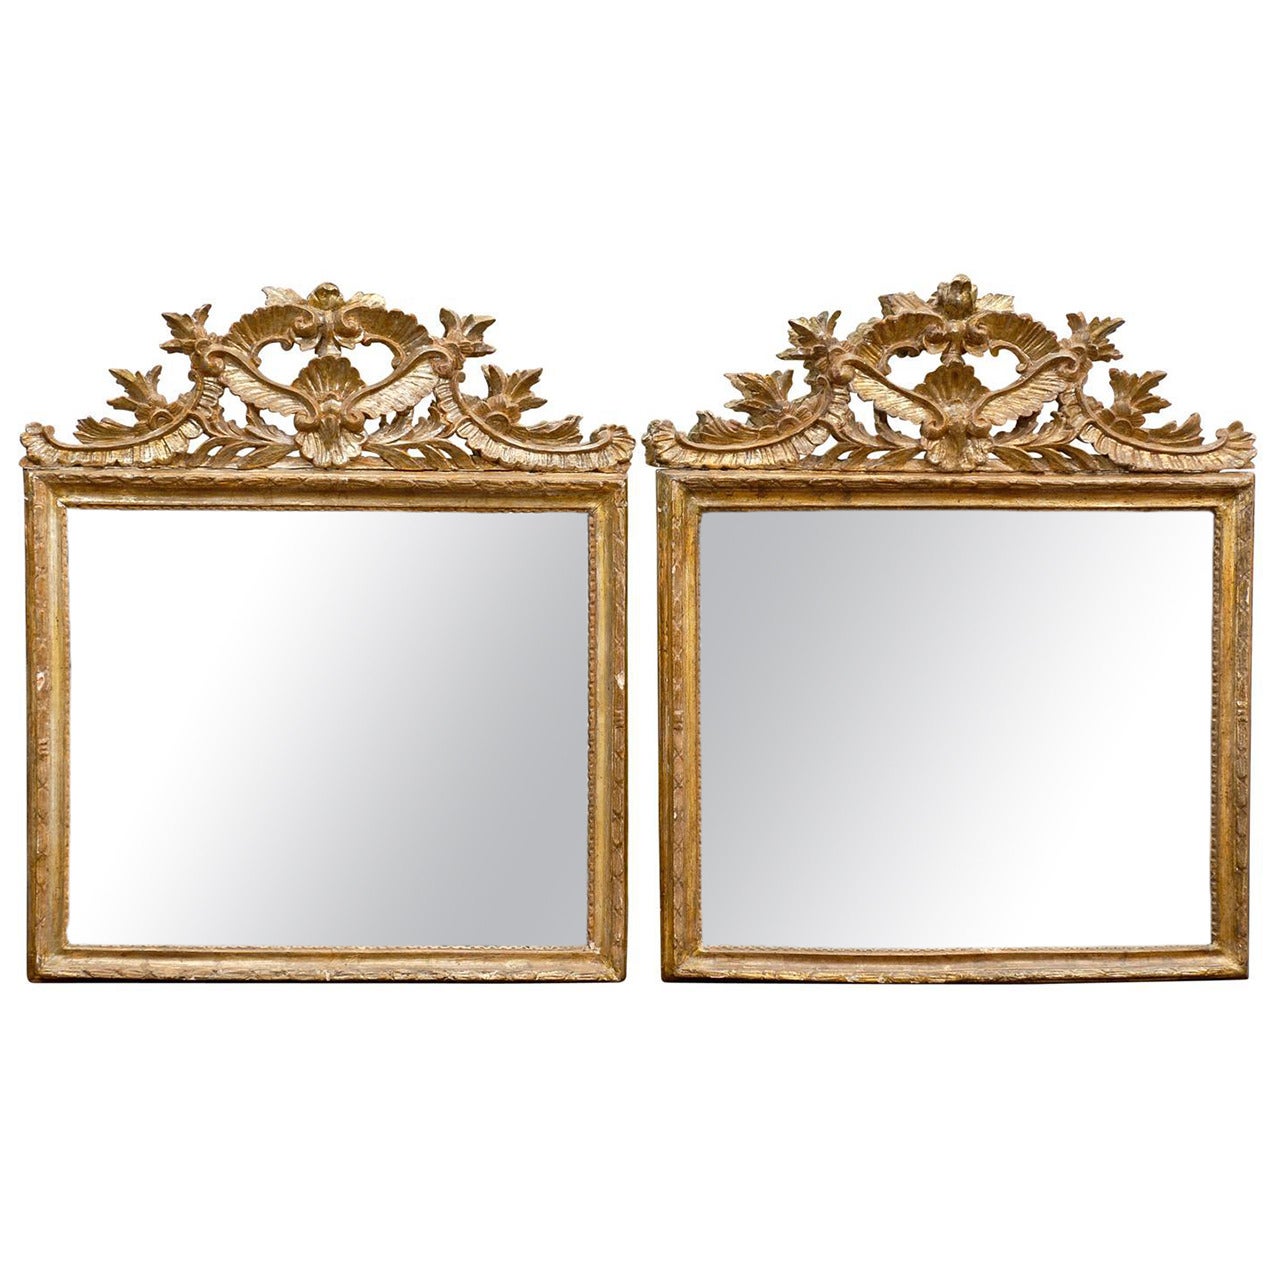 Pair of 19th Century Italian Neoclassical Giltwood Mirrors For Sale